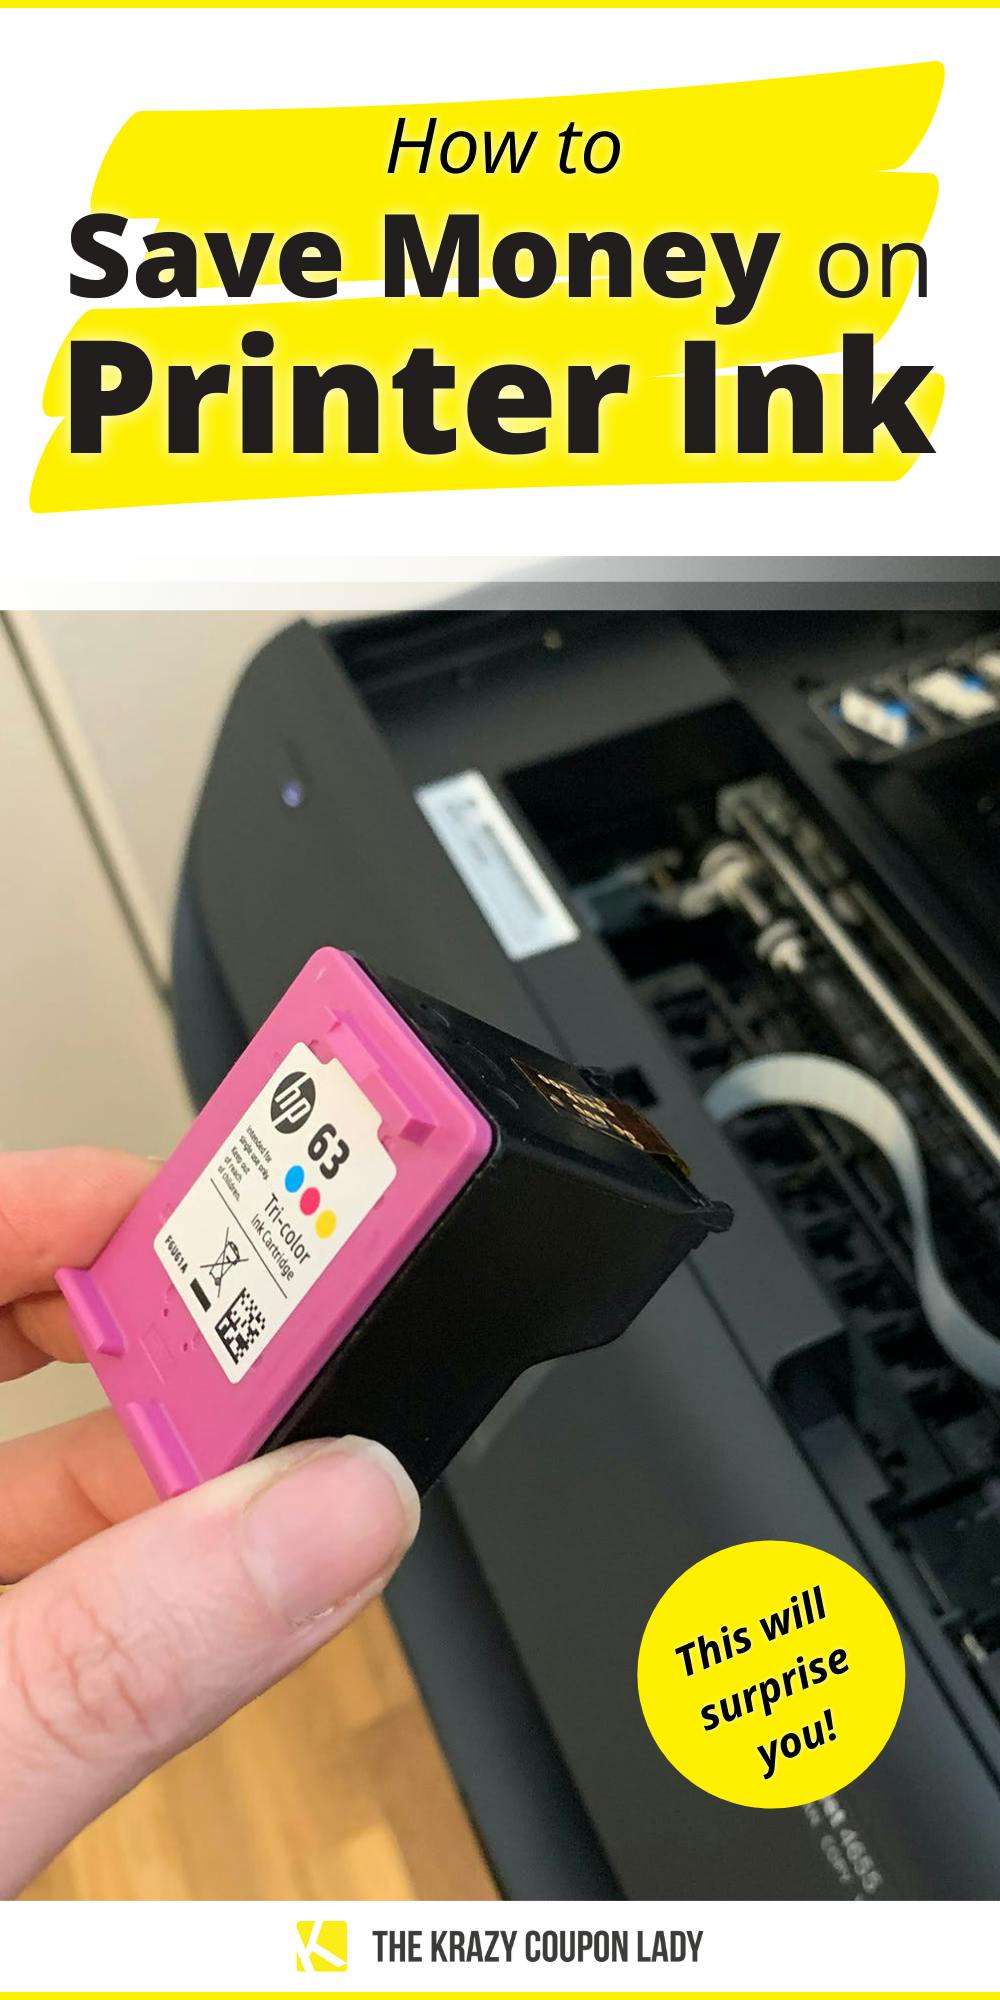 6 Easy Ways to Save on Printer Ink